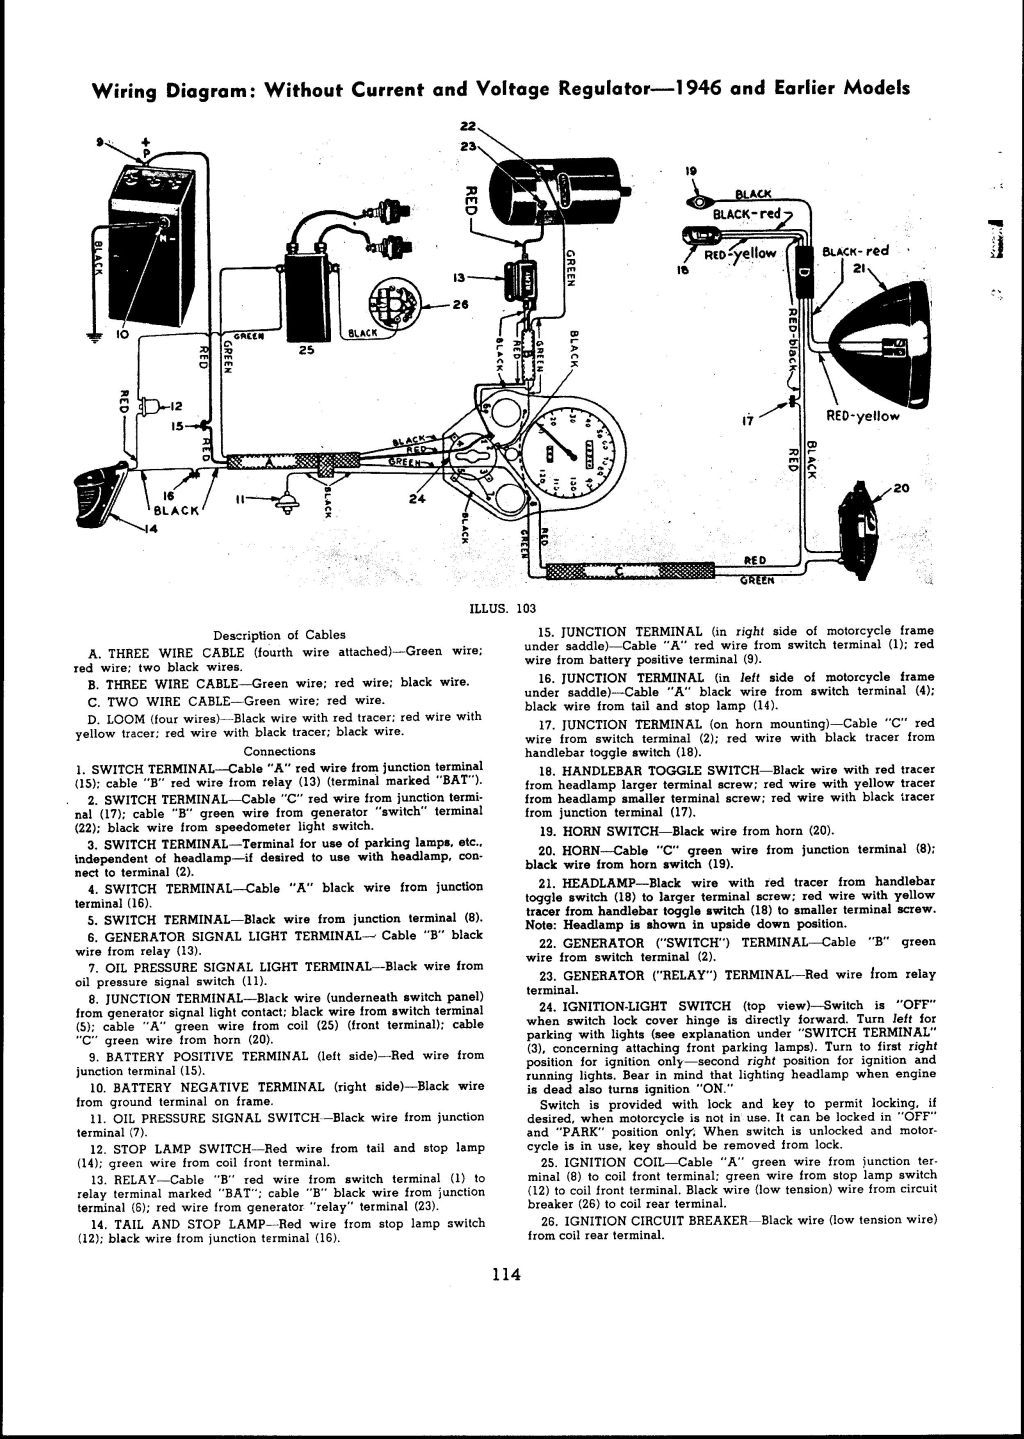 1946 And Earlier Models Wiring Diagram: With Current And Voltage - Voltage Regulator Wiring Diagram